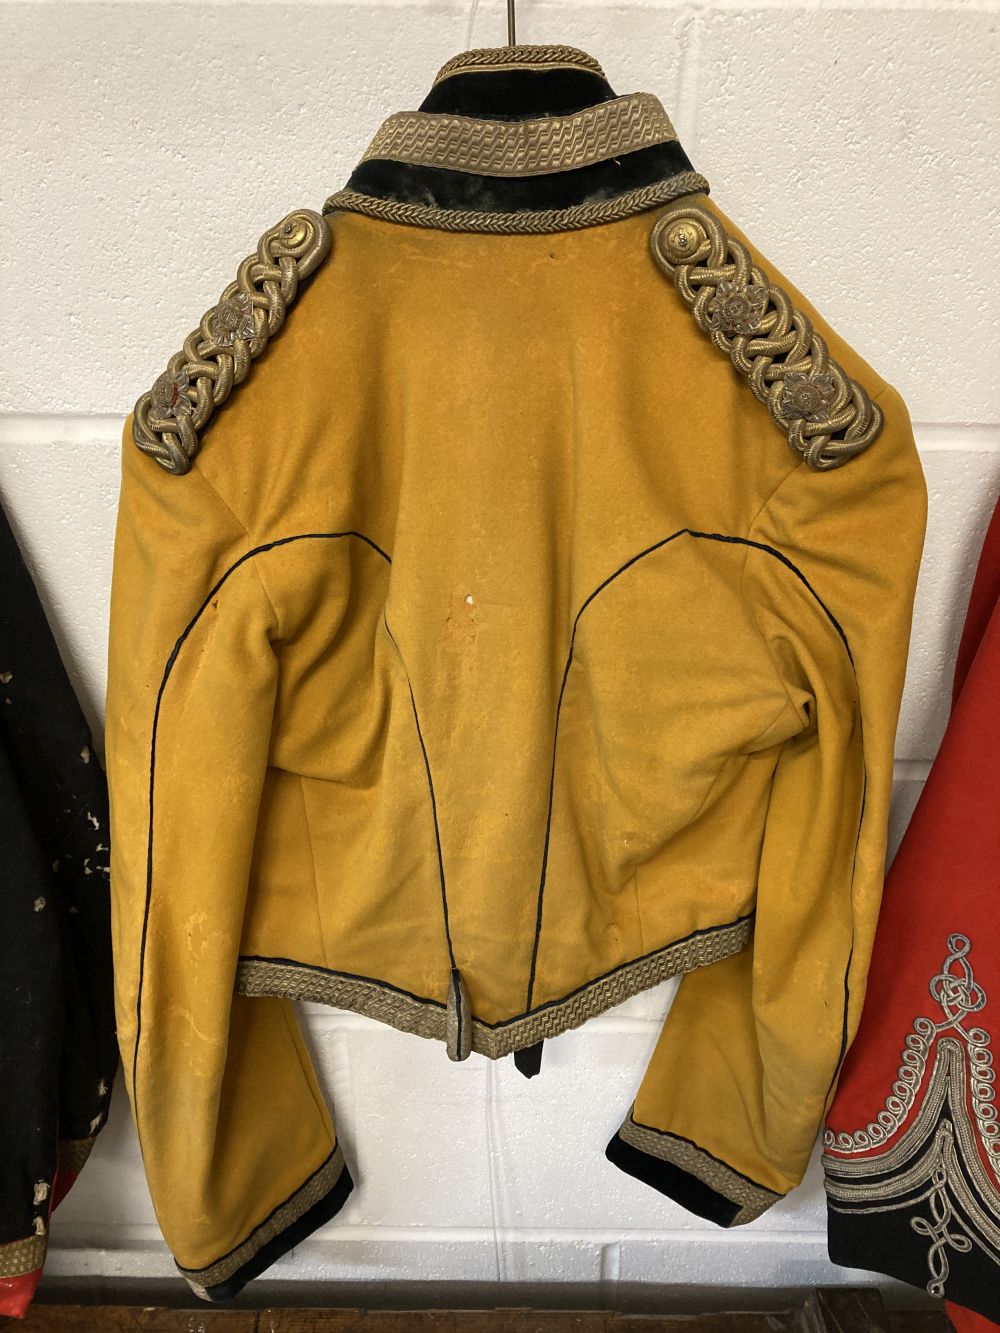 Skinner's Horse. An interwar period Indian Cavalry jacket and waistcoat belonging to R.P. Prentice - Image 4 of 9